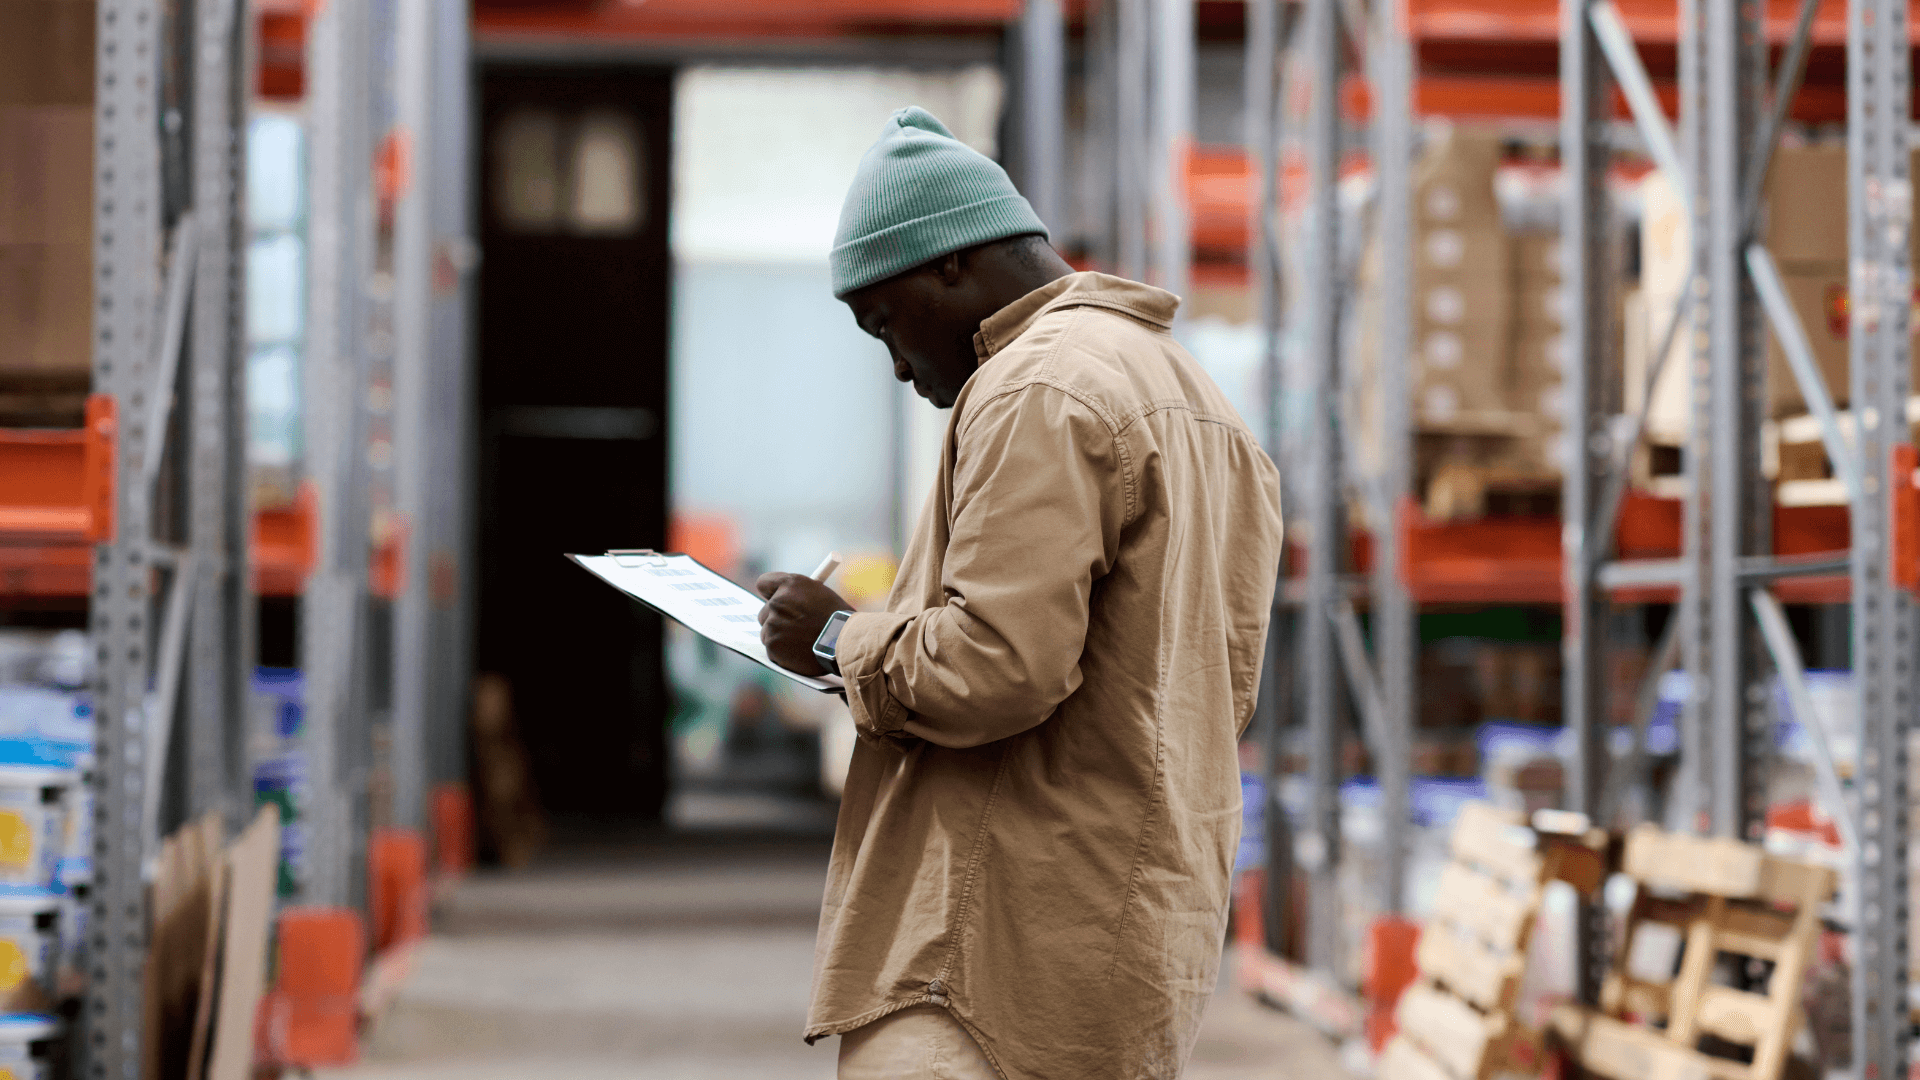 e-Commerce Warehousing 101: Best Practices and Checklist